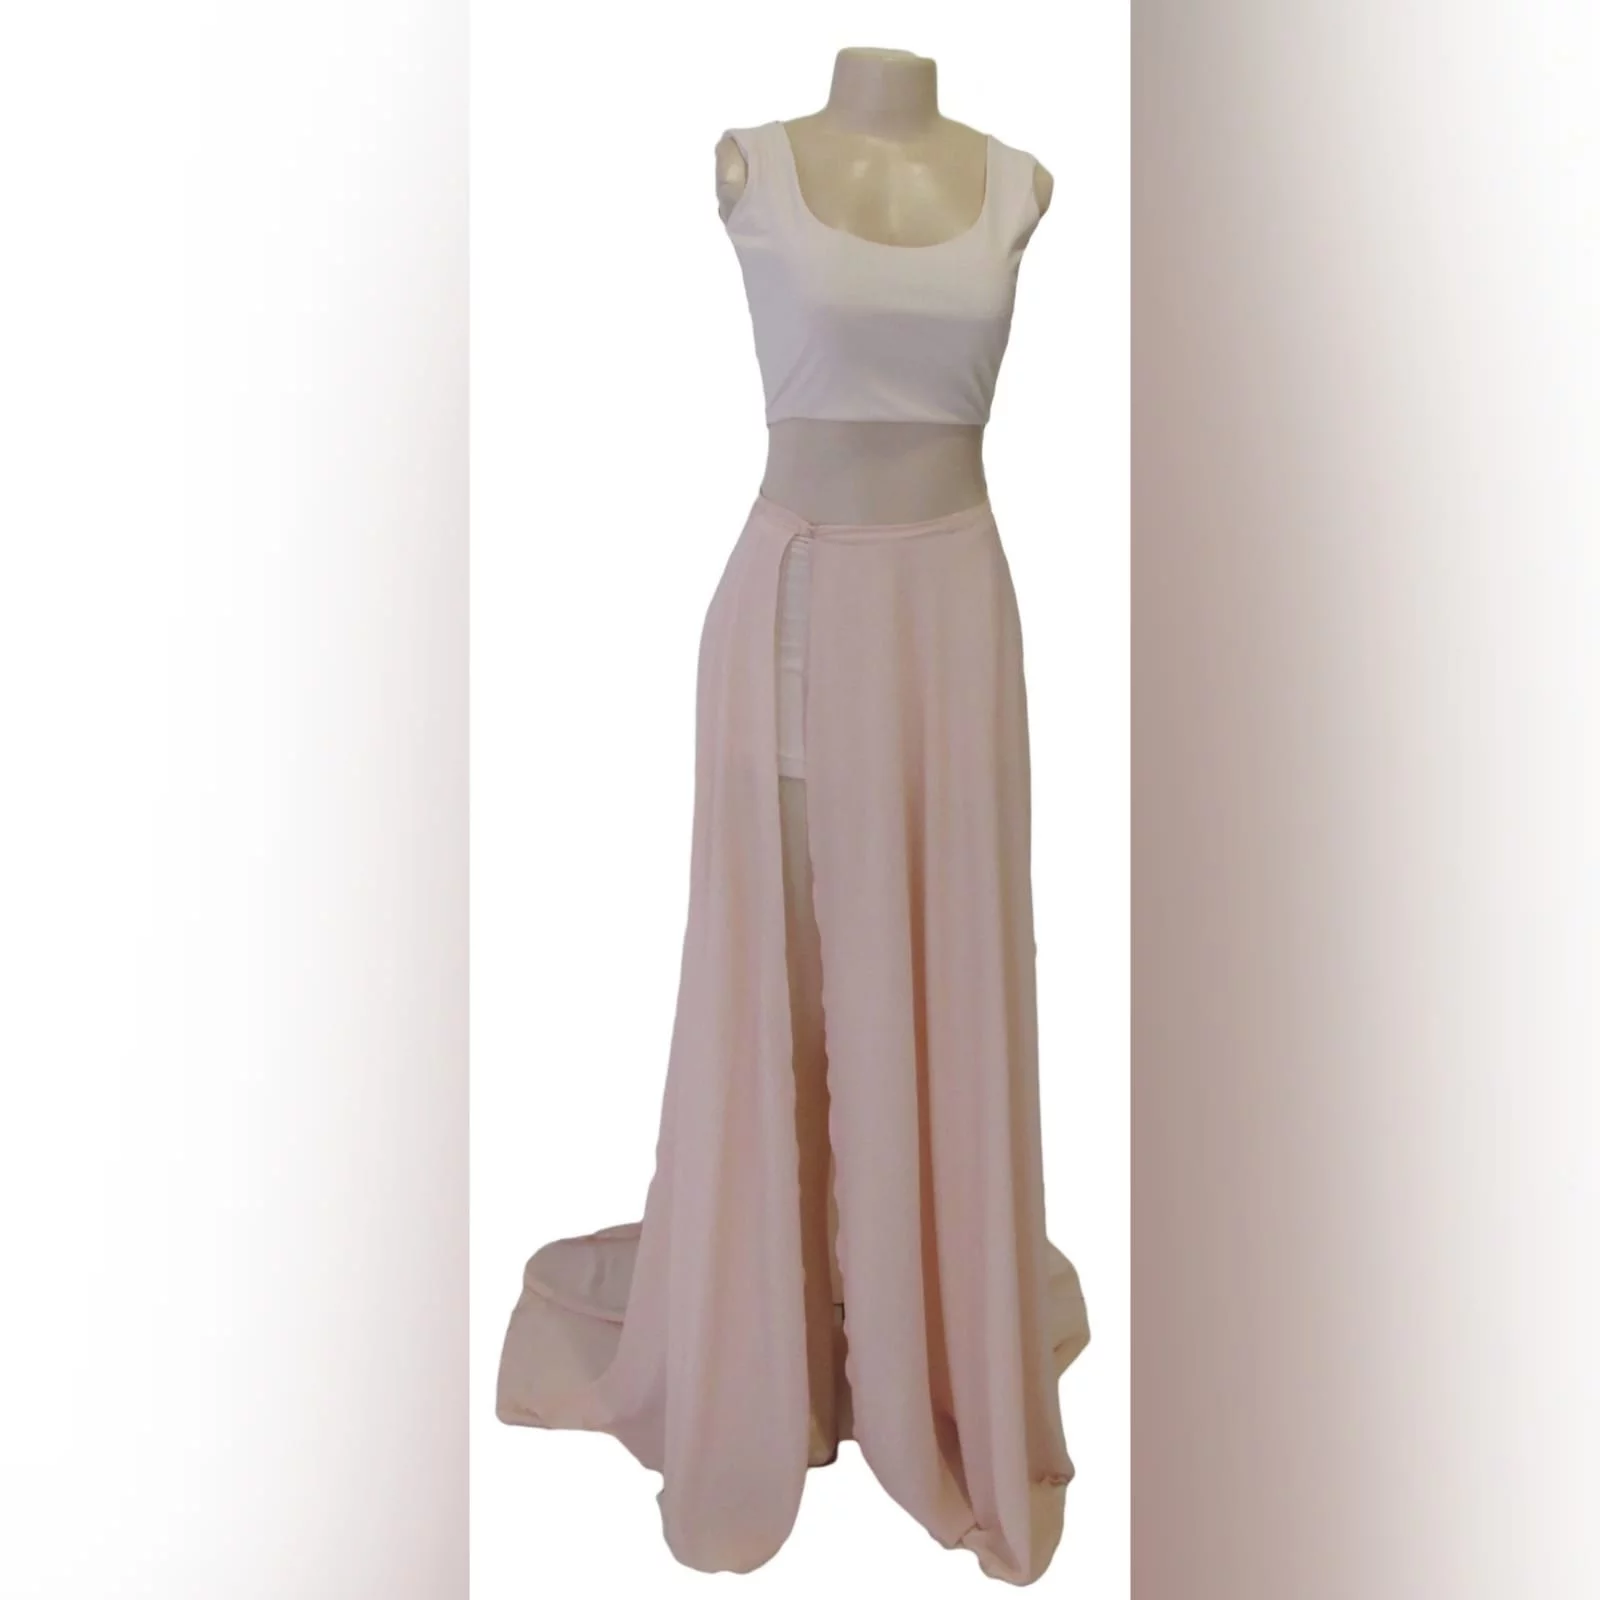 2 piece nude and white smart casual prom dress 5 2 piece nude and white smart casual prom dress. White crop top with a rounded neckline, low open back closed with buttons. Long chiffon skirt with a slit and a train.